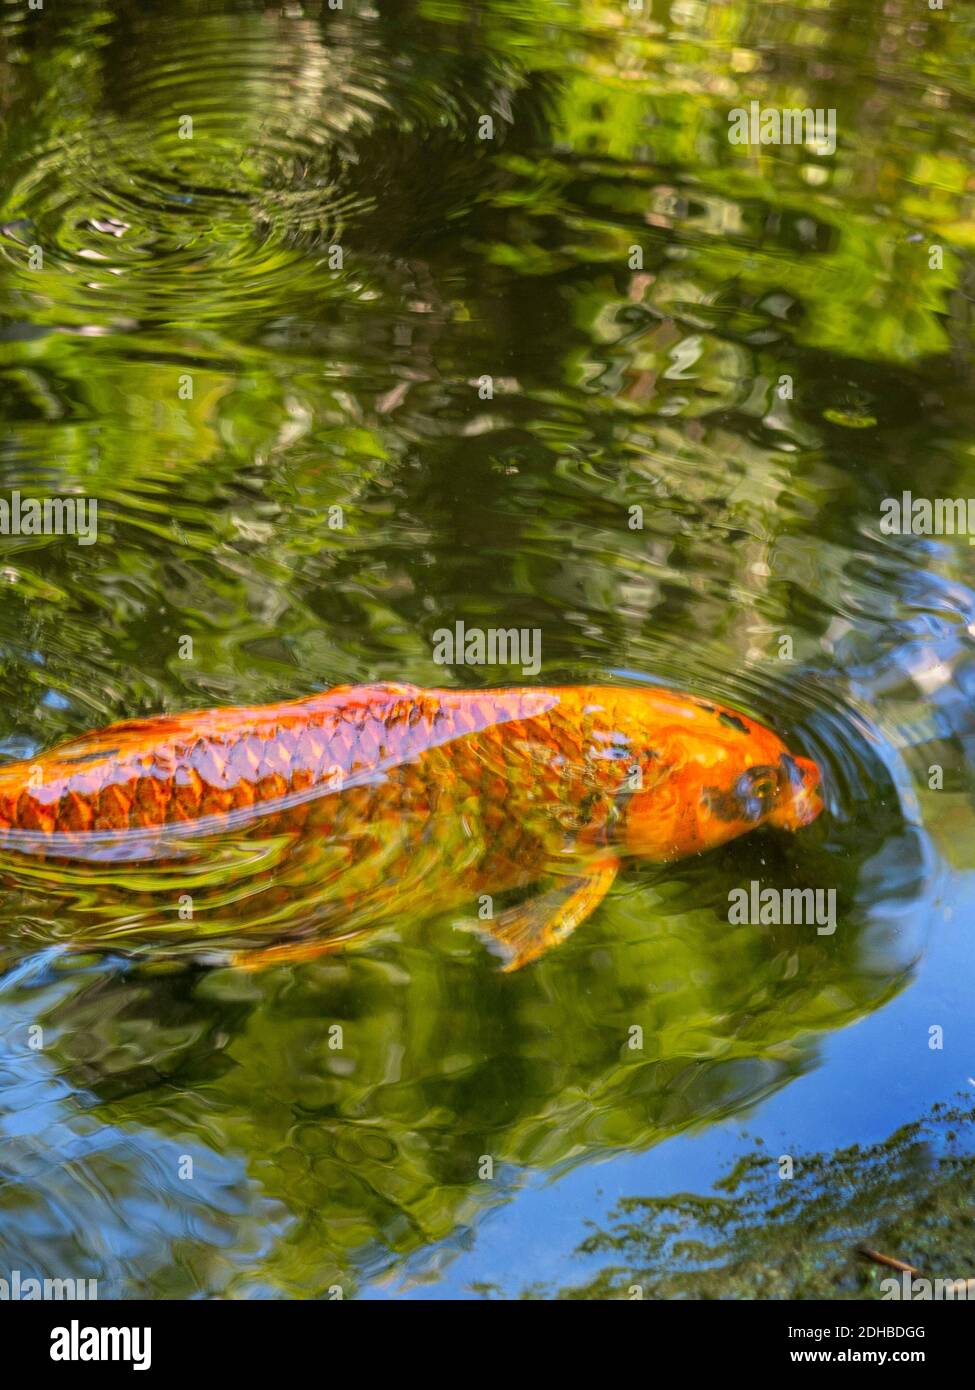 Colorful koi fish swing in a pond at a Los Angeles arboretum. Koi is a colored varieties of the Amur carp (Cyprinus rubrofuscus) that are kept for dec Stock Photo